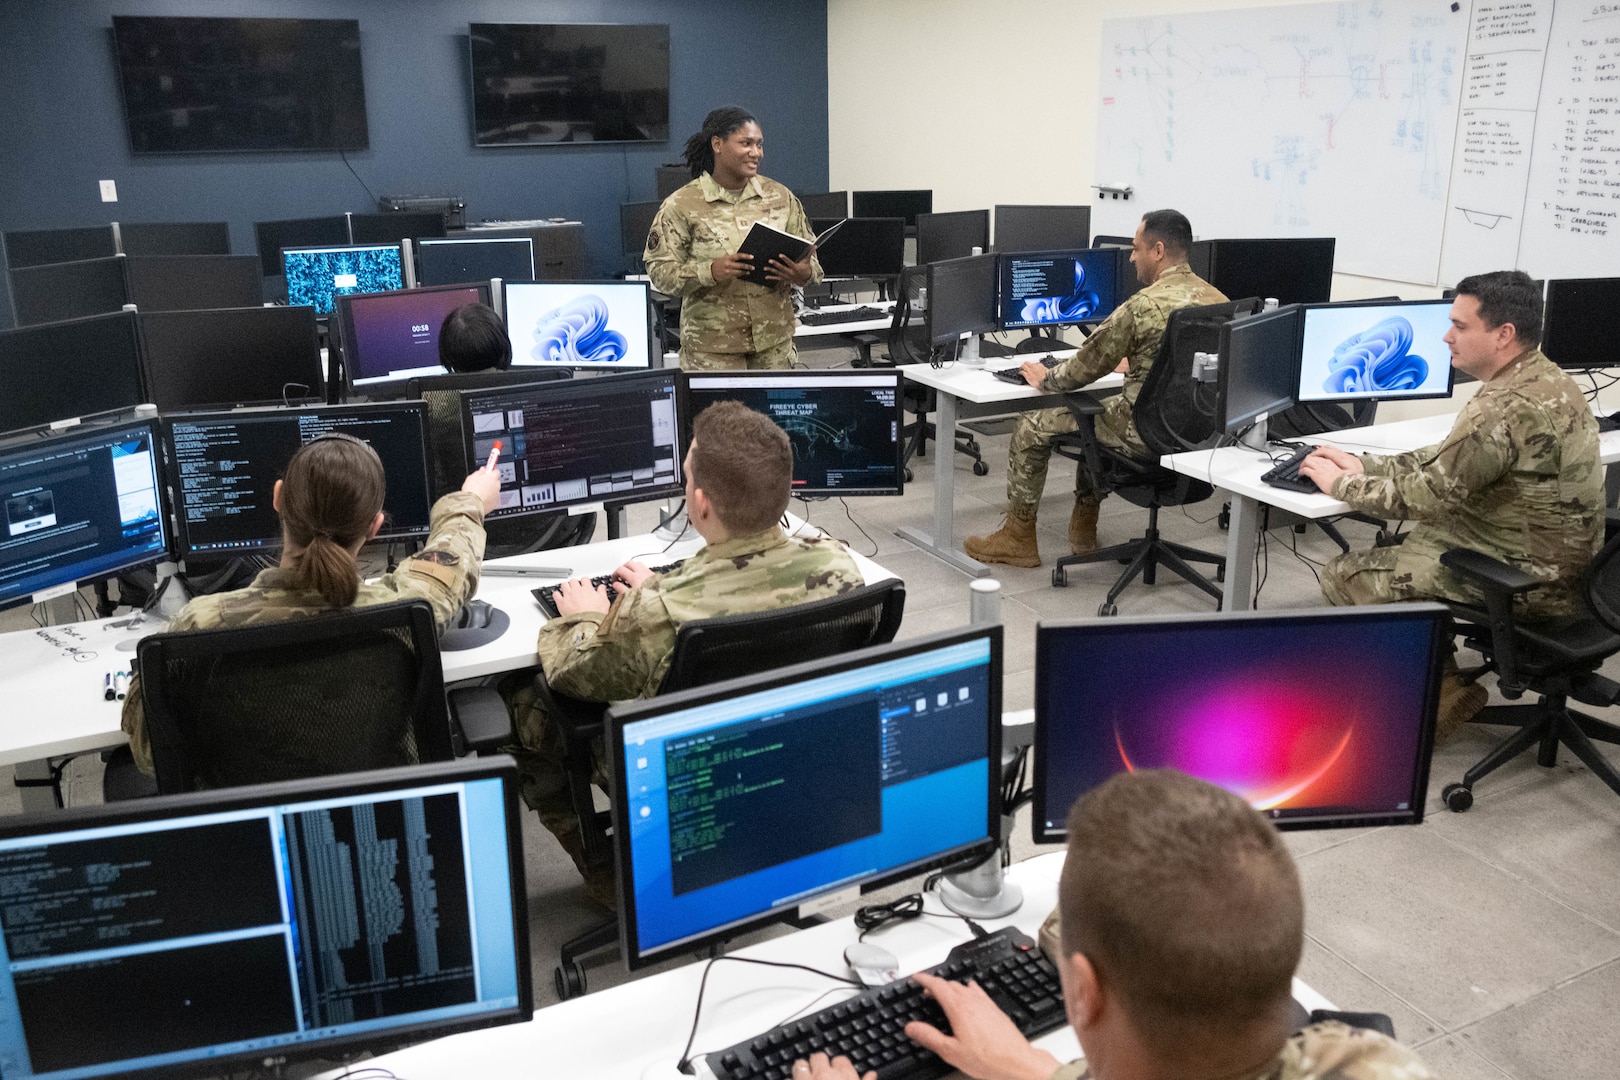 U.S. Air Force Capt. Ashley Oates, 275th Cyberspace Operations Squadron flight commander, briefs Airmen assigned to the 275th Cyberspace Operations Squadron at Warfield Air National Guard Base at Martin State Airport, Middle River, Md., Jan. 10, 2023. Oates leads a cyber protection team that was the first in the Air National Guard to certify on a live Department of Defense network.